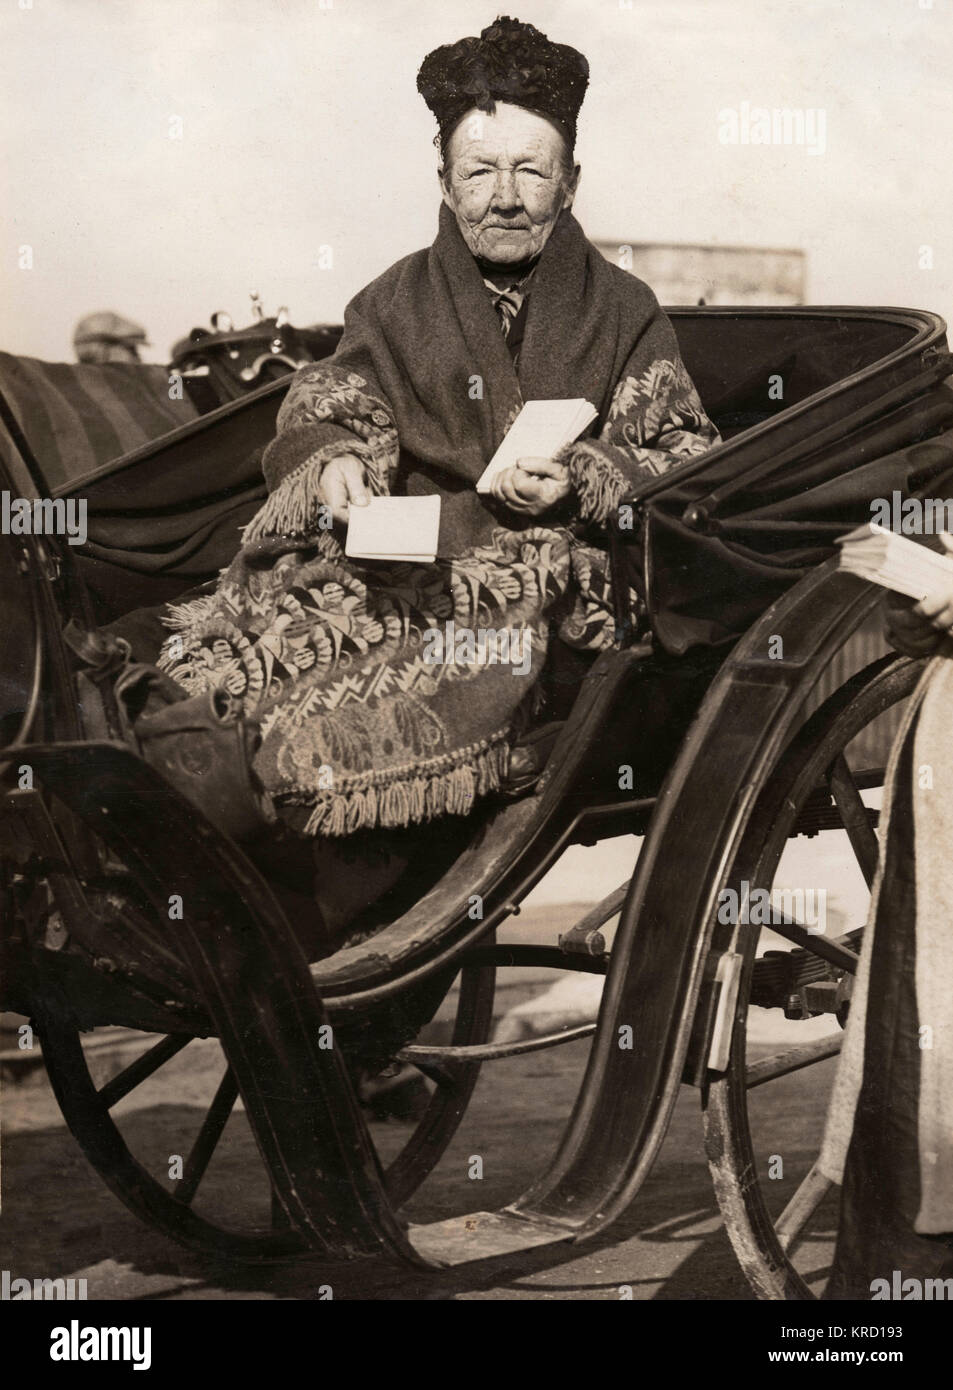 An elderly woman known as Old Kate, who makes her living from the sale of race cards.  She is seen here sitting in an open carriage, provided for her by some of her patrons so that she can continue working despite having recently broken her leg.       Date: circa 1910 Stock Photo